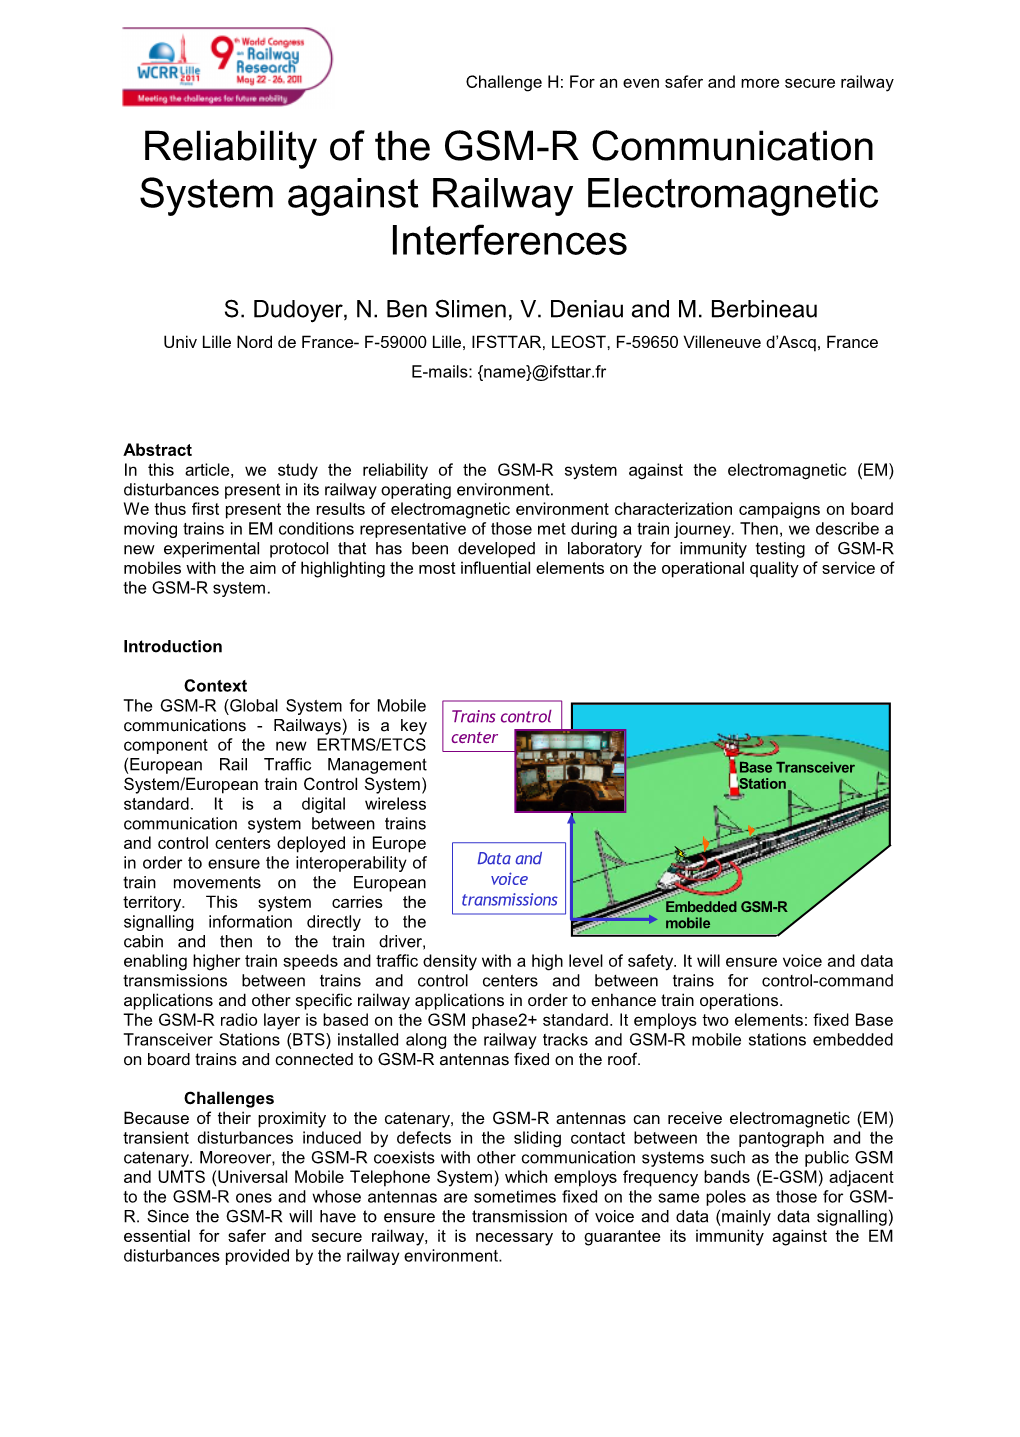 Reliability of the GSM-R Communication System Against Railway Electromagnetic Interferences